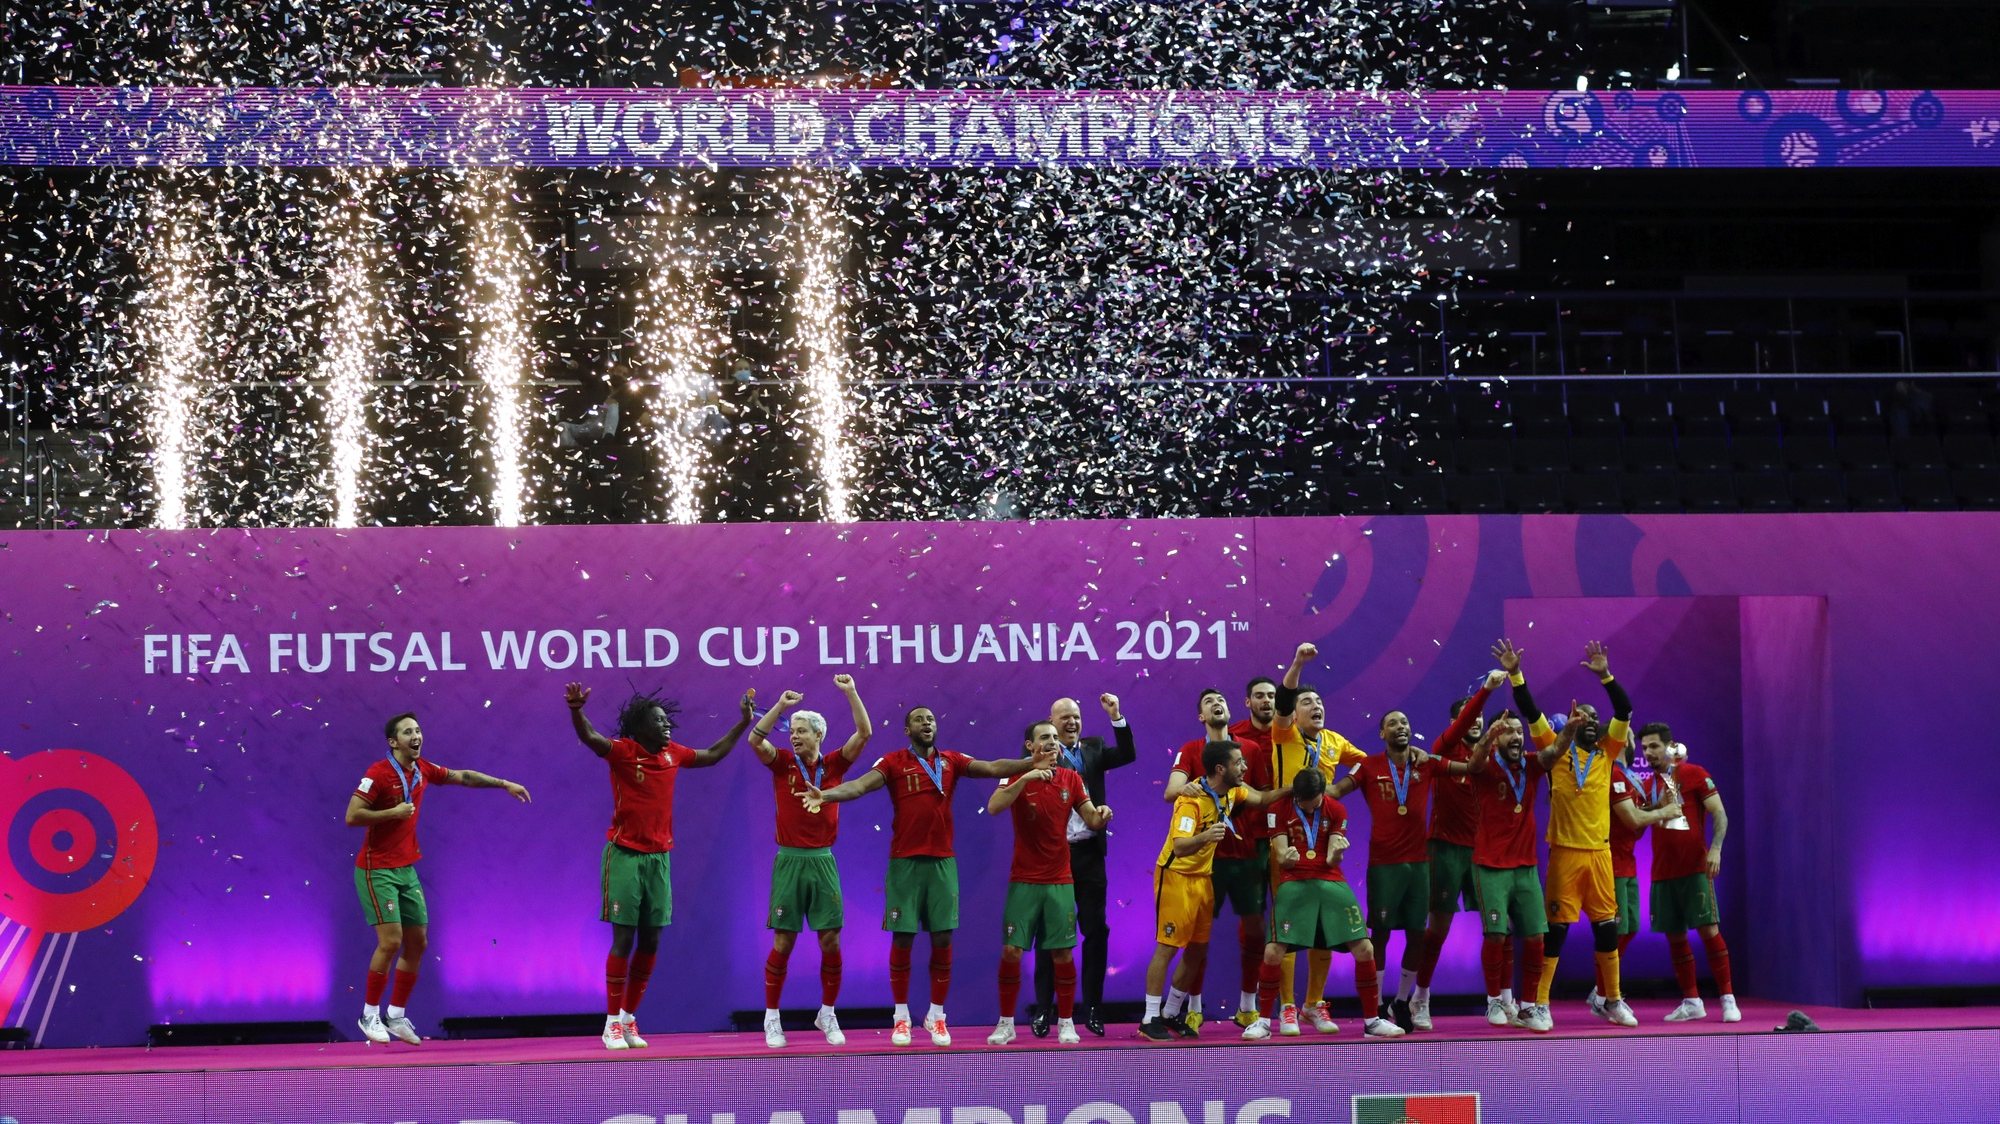 epa09504591 Players of Portugal celebrate during the award ceremony after winning the FIFA Futsal World Cup Lithuania 2021 final between Argentina and Portugal in Kaunas, Lithuania, 03 October 2021.  EPA/TOMS KALNINS